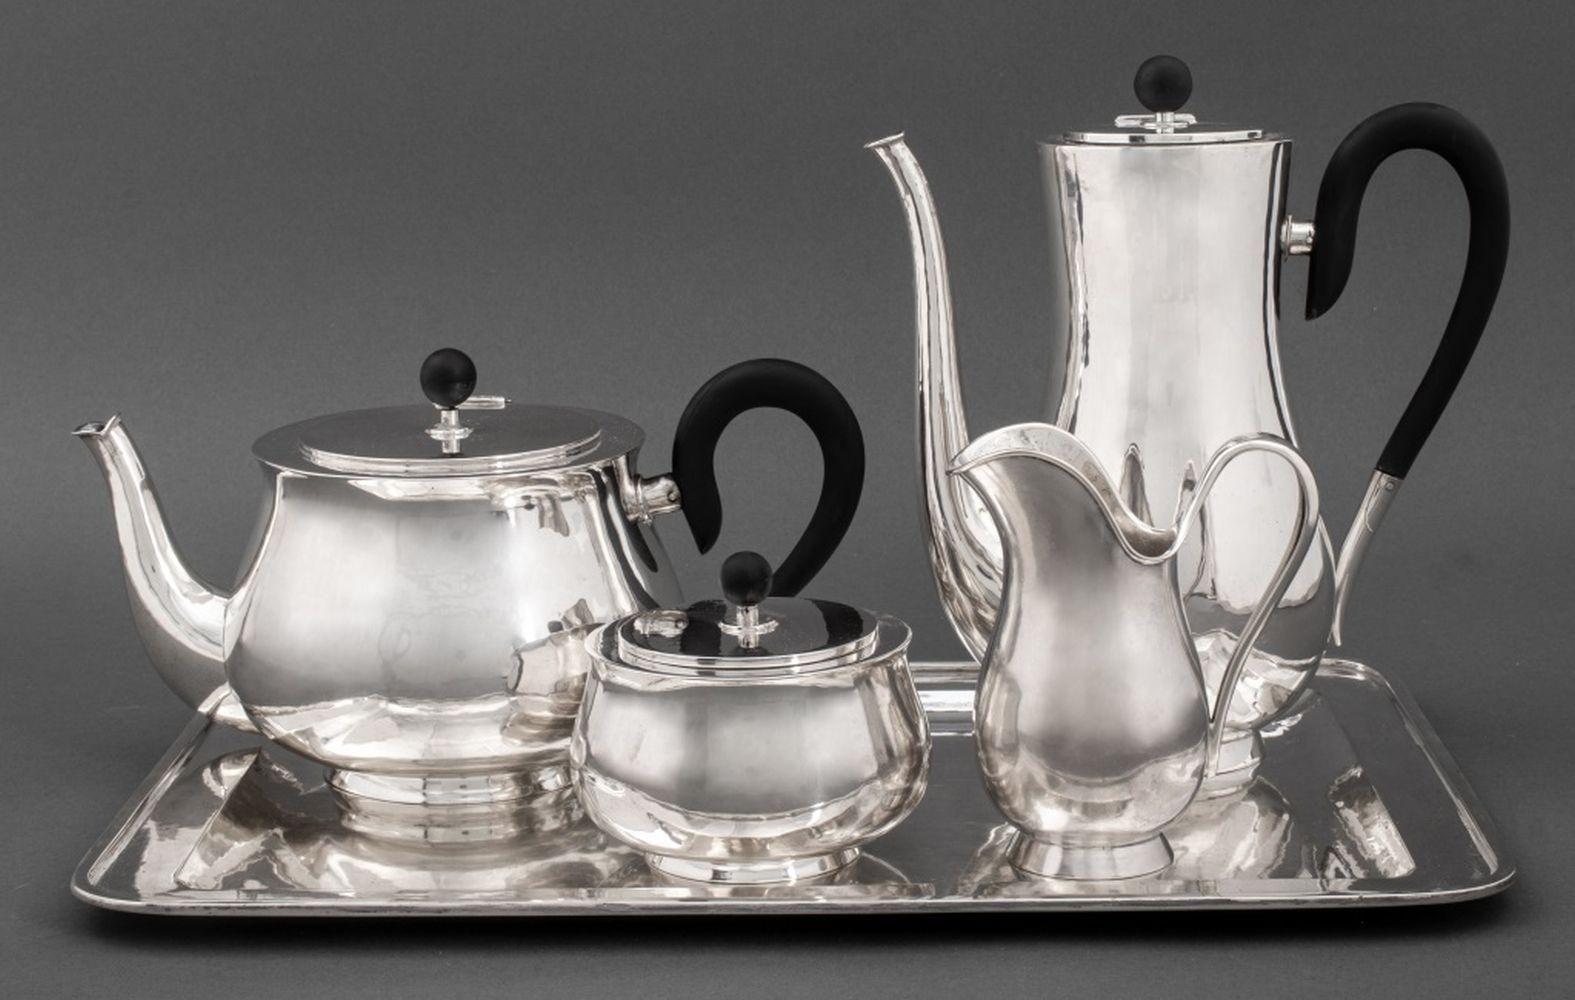 Art Deco style 800 silver tea and coffee service set consisting of five pieces (tray, pot, coffee pot, sugar jar, creamer jug). The pots include ebonized finials and handles. They are marked with crescent moon and crown which verifies the purity of